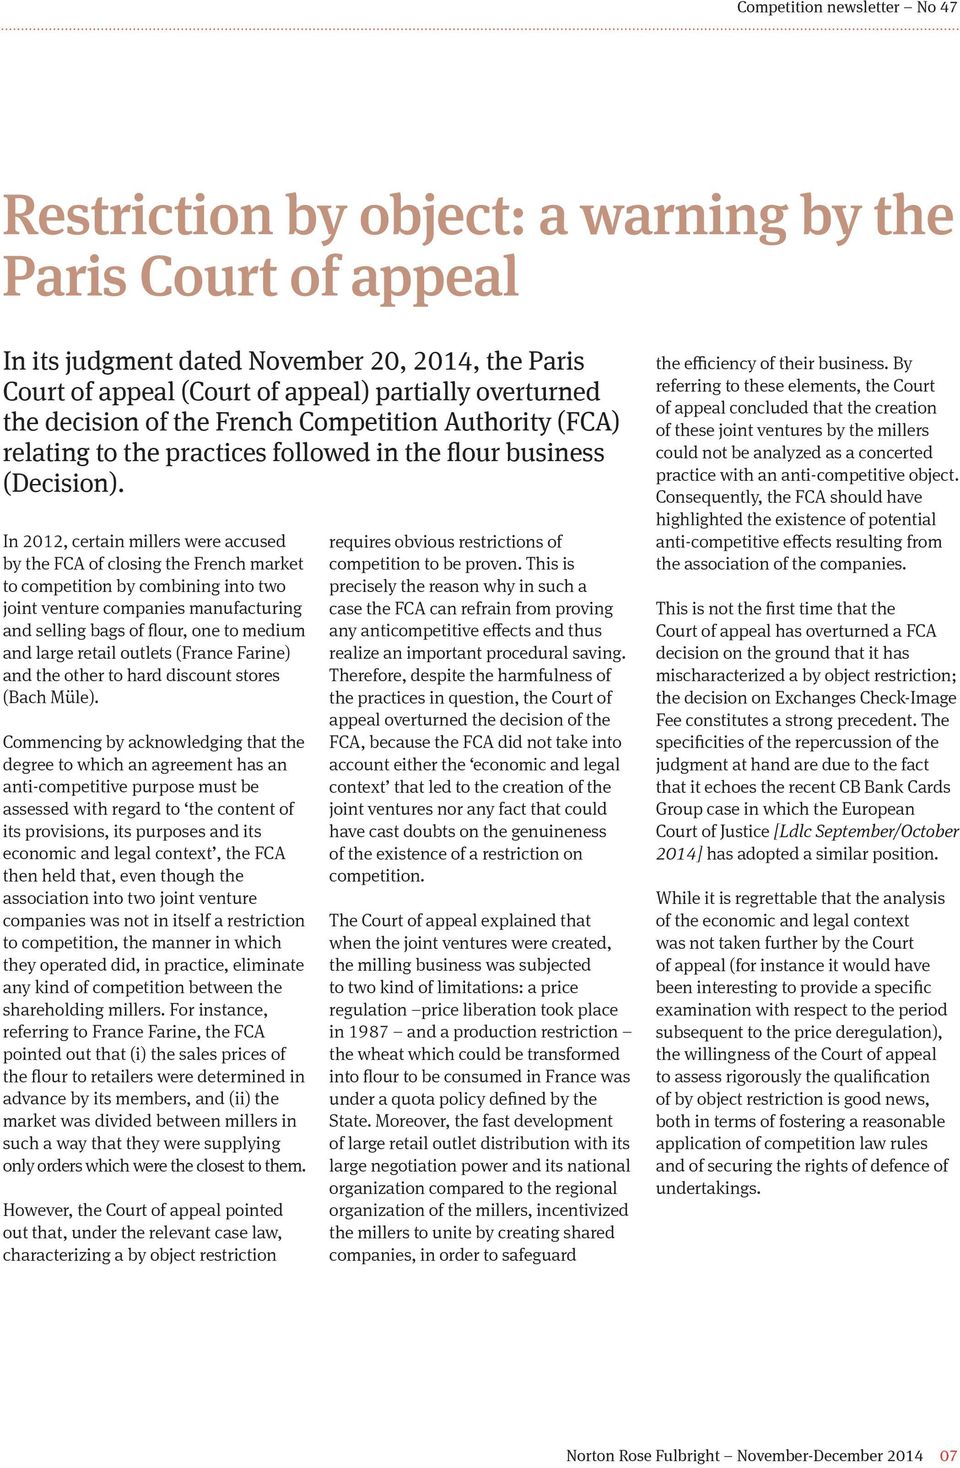 In 2012, certain millers were accused by the FCA of closing the French market to competition by combining into two joint venture companies manufacturing and selling bags of flour, one to medium and